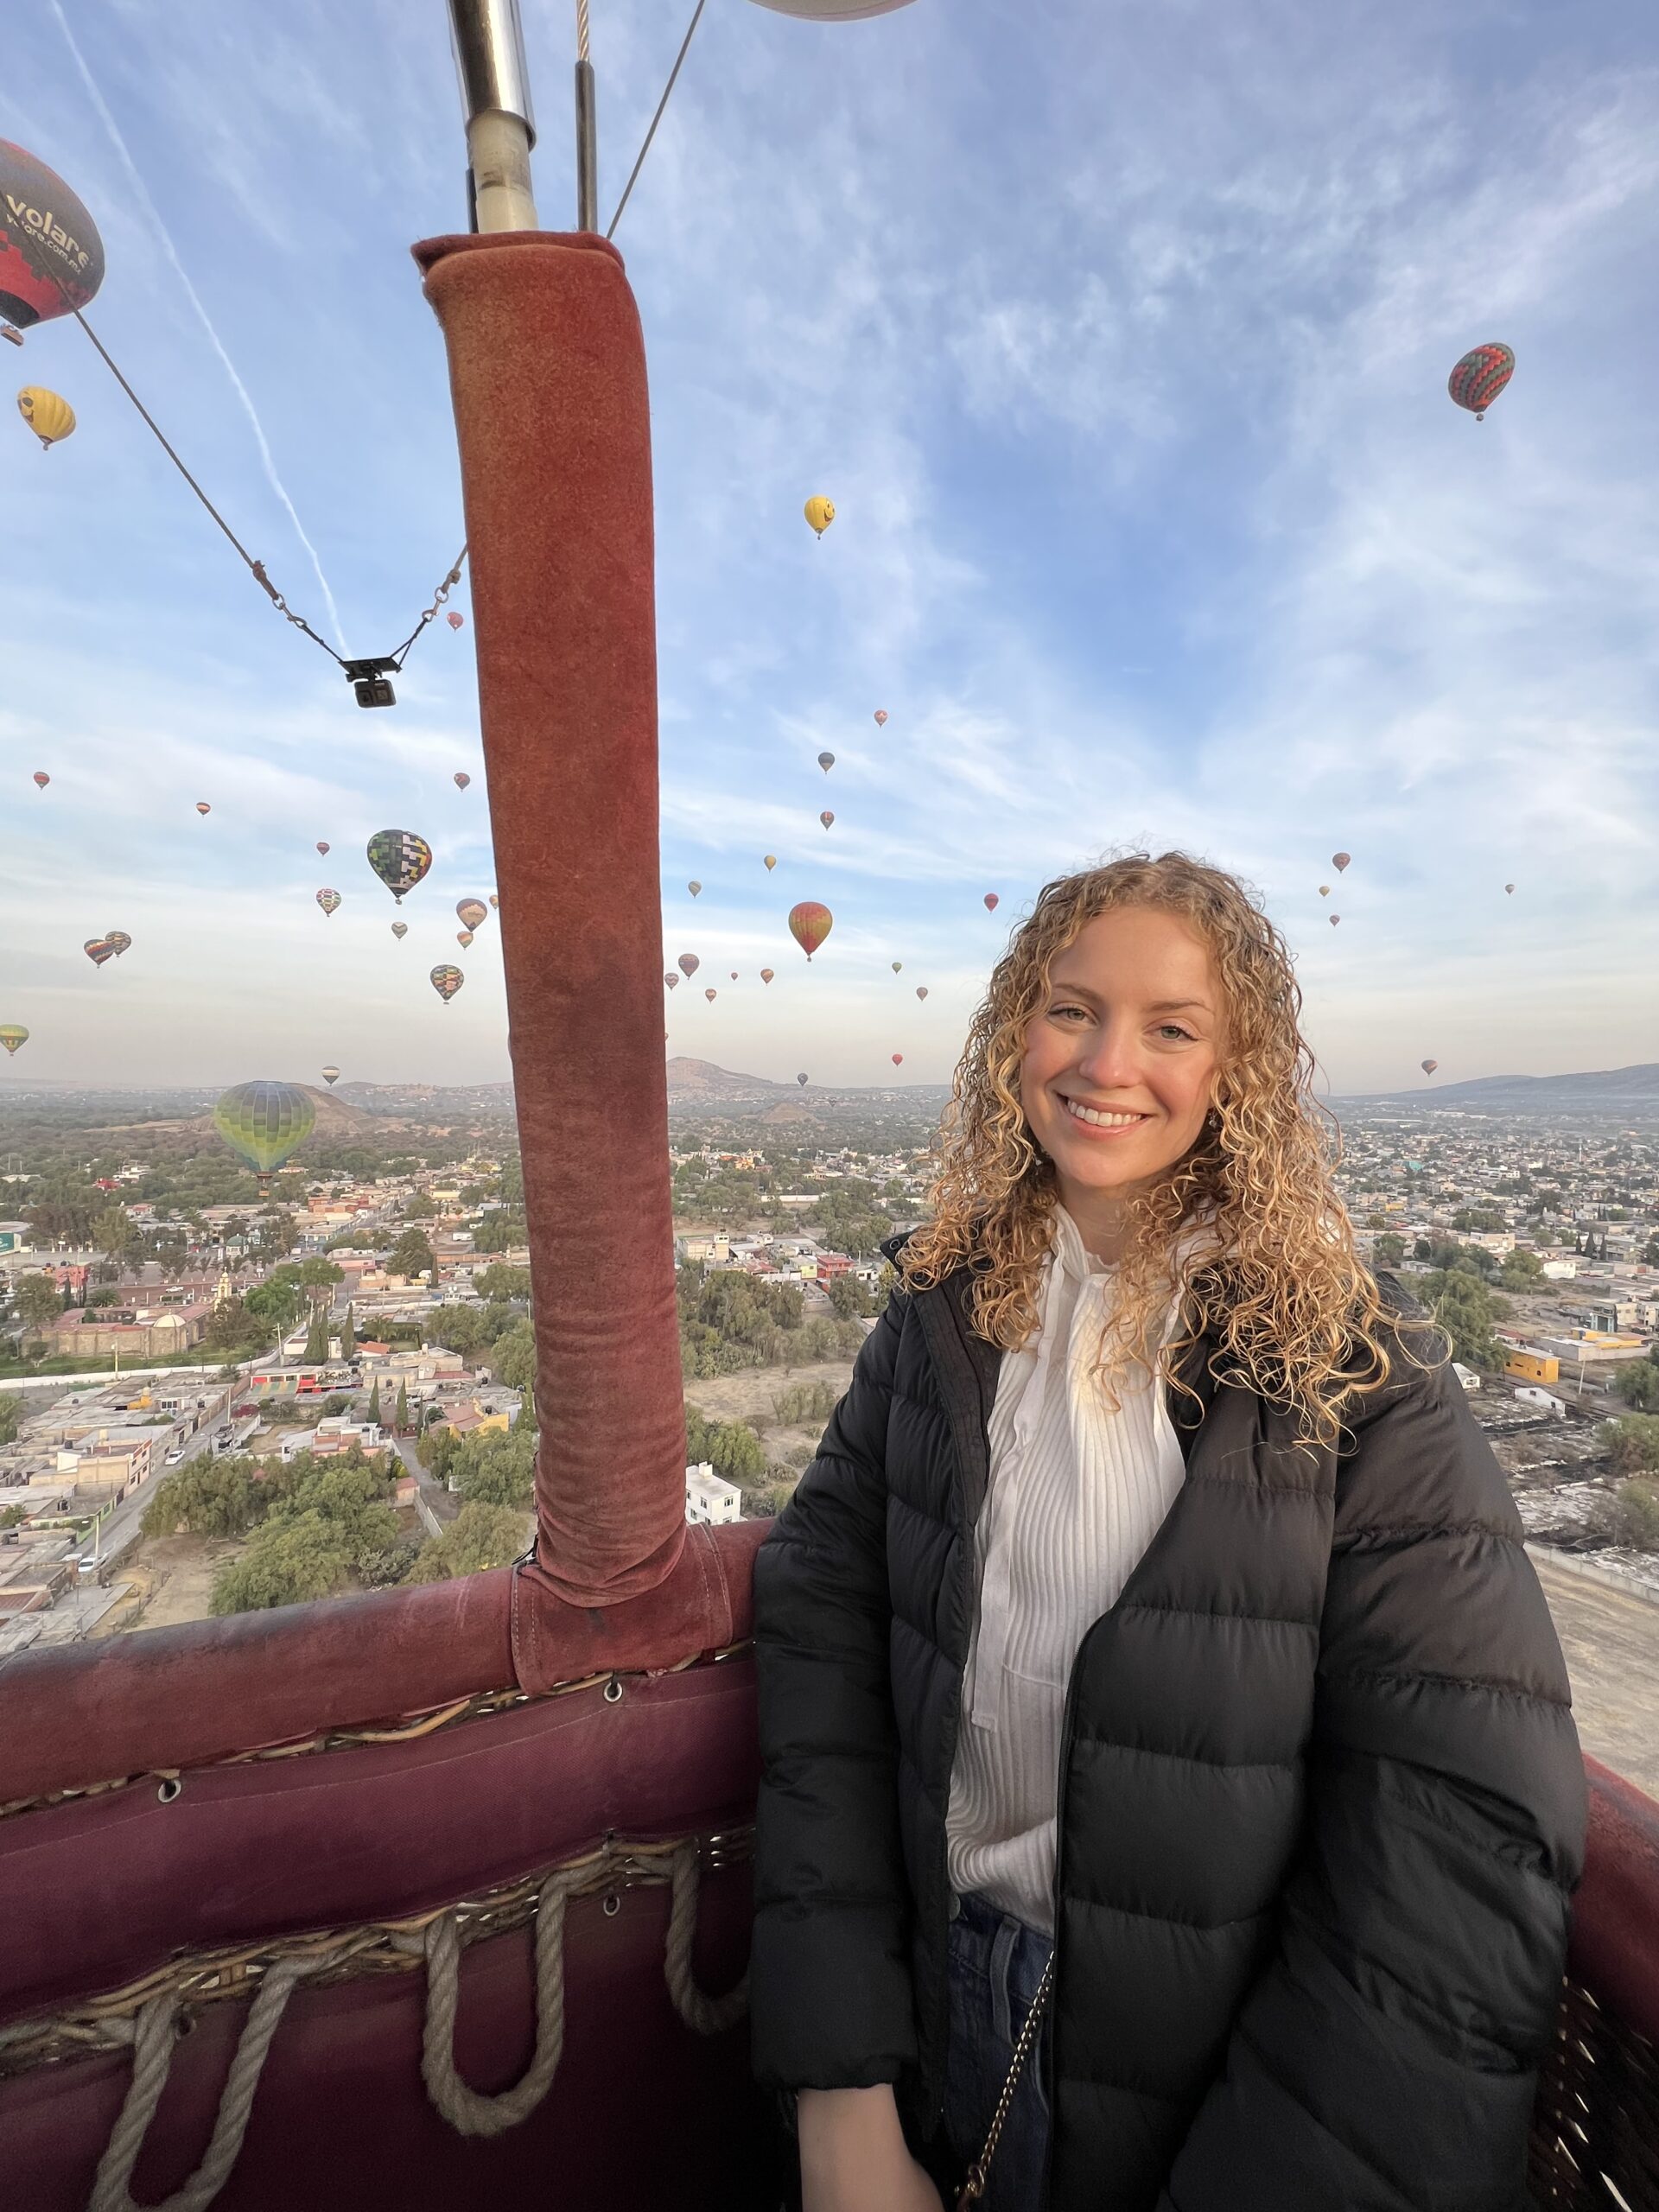 Genevieve, a young woman, sitting in a hot air balloon.